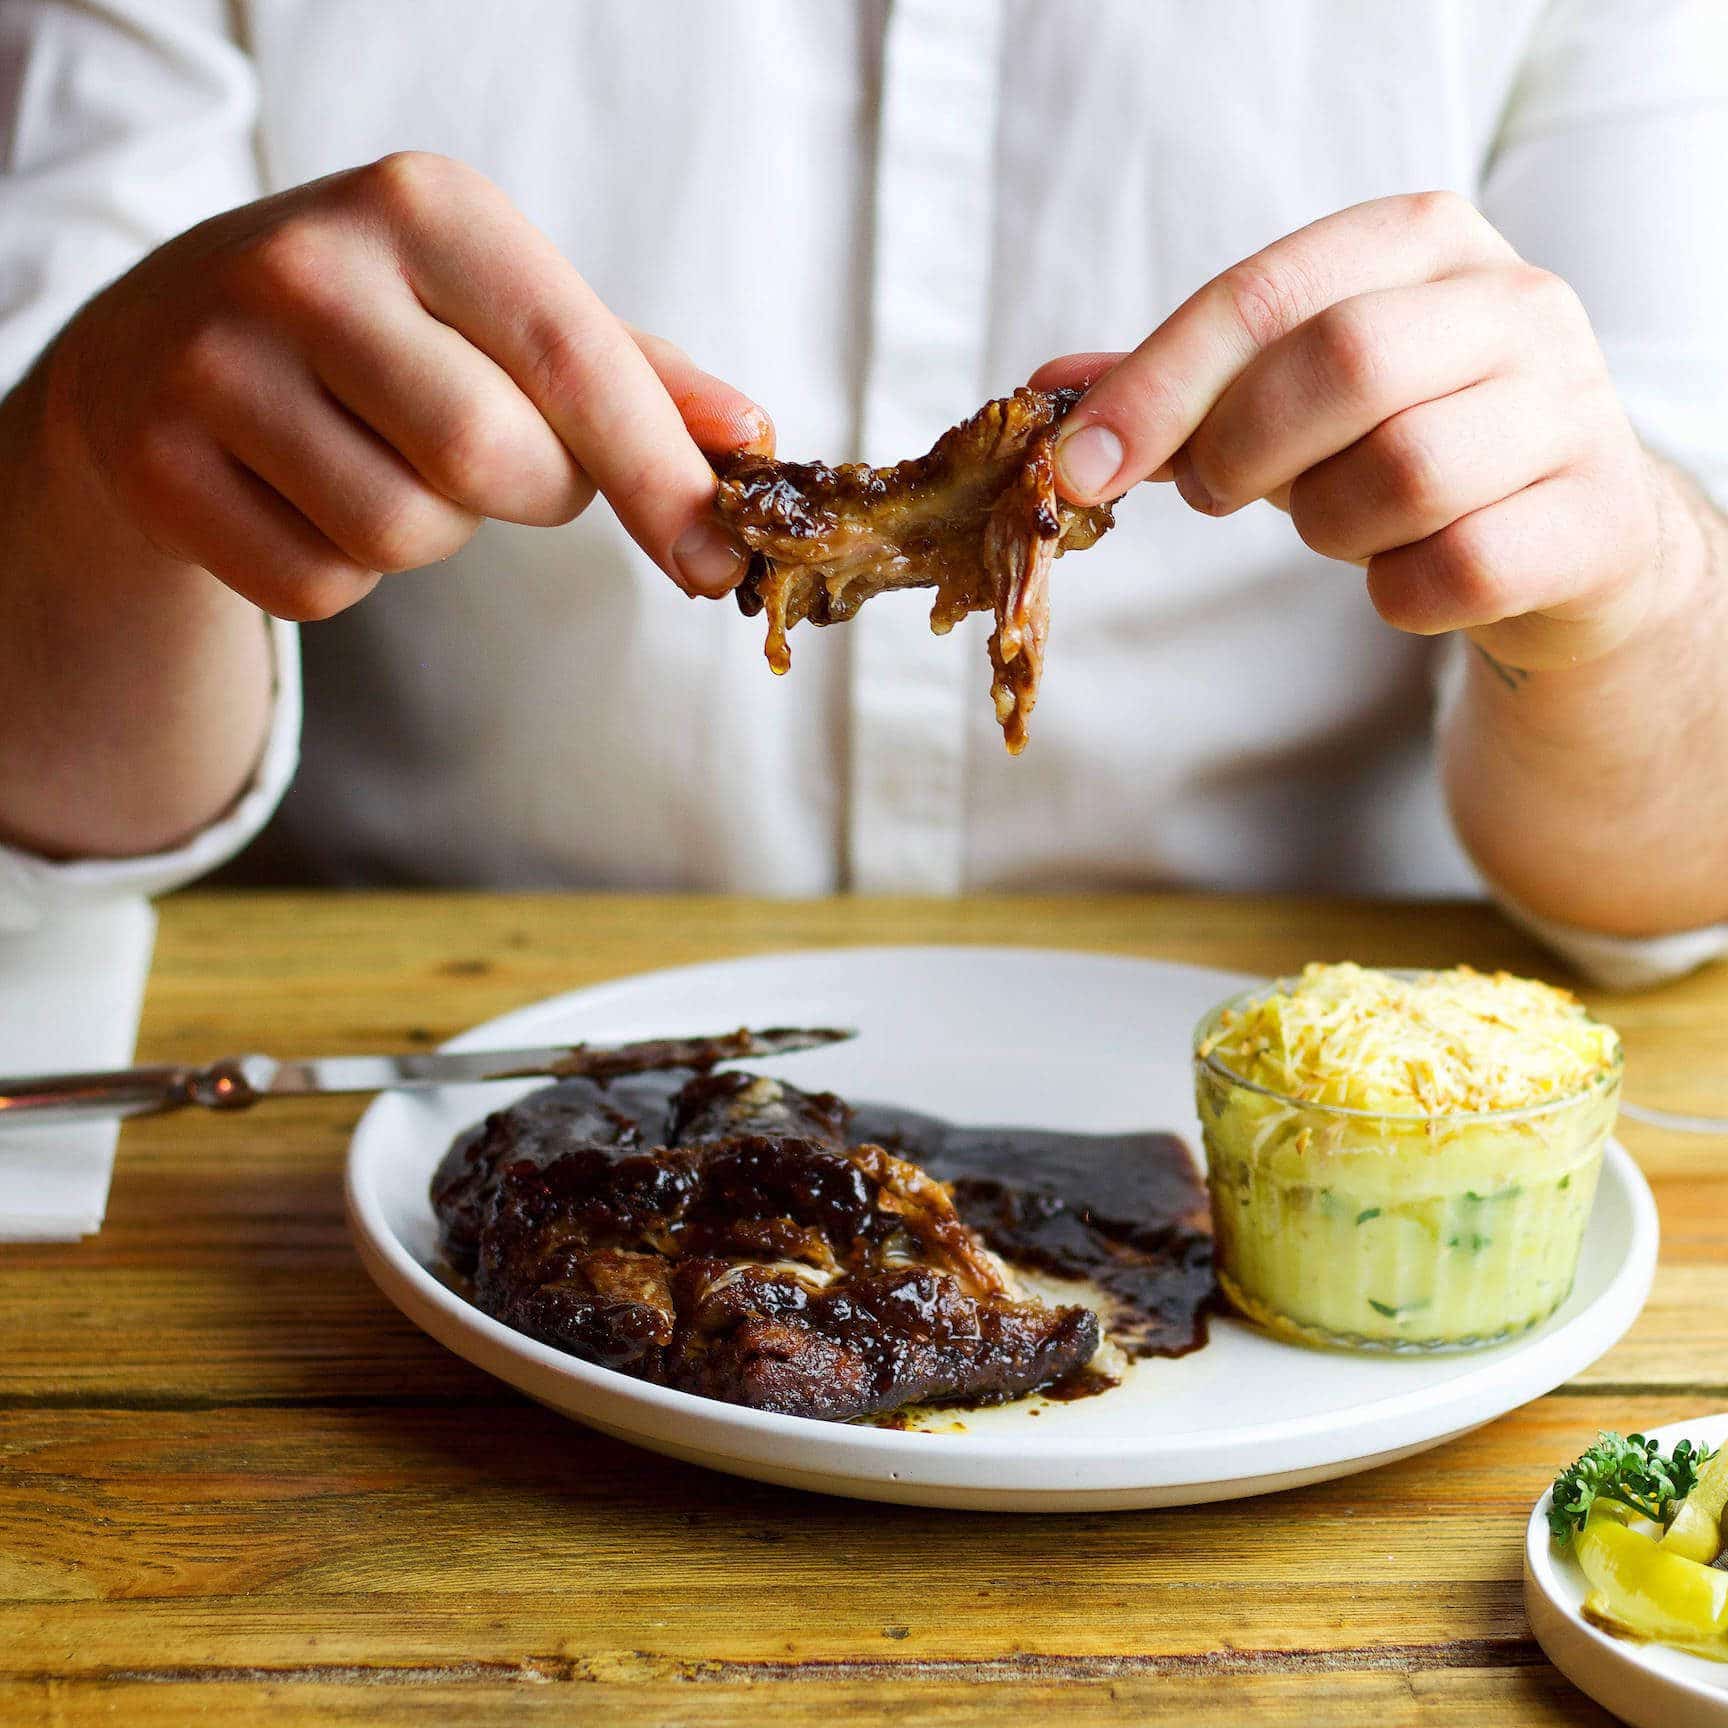 Slow roasted BBQ ribs with creamy sauce and baked mashed potatoes with smoked cheese. You will just lick your fingers.